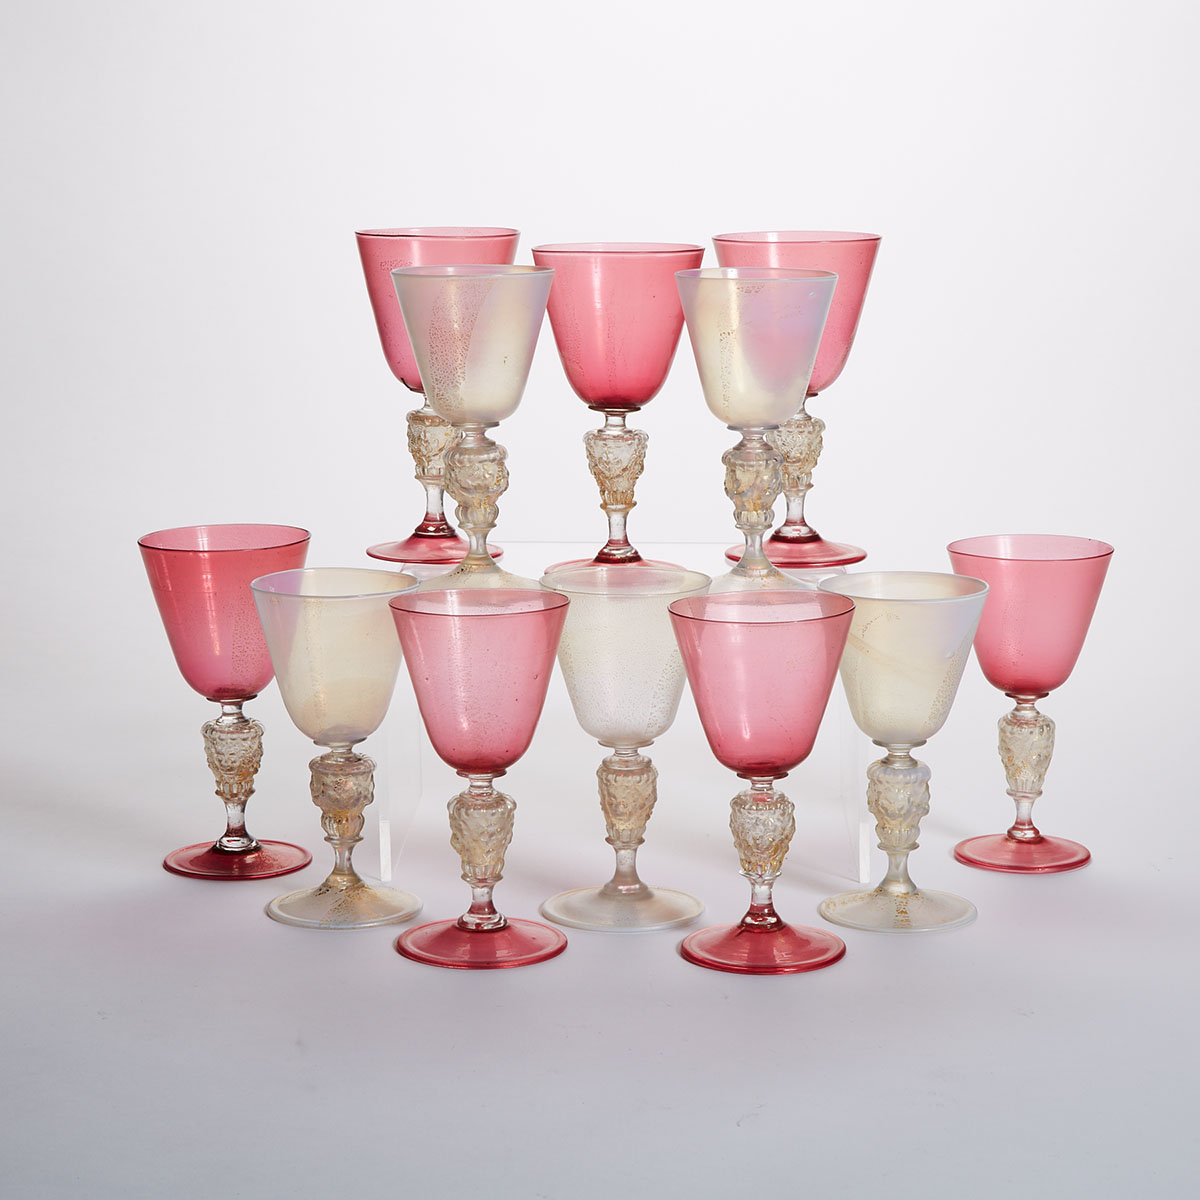 Twelve Venetian Red or Opalescent and Gilt Glass Goblets, early 20th century